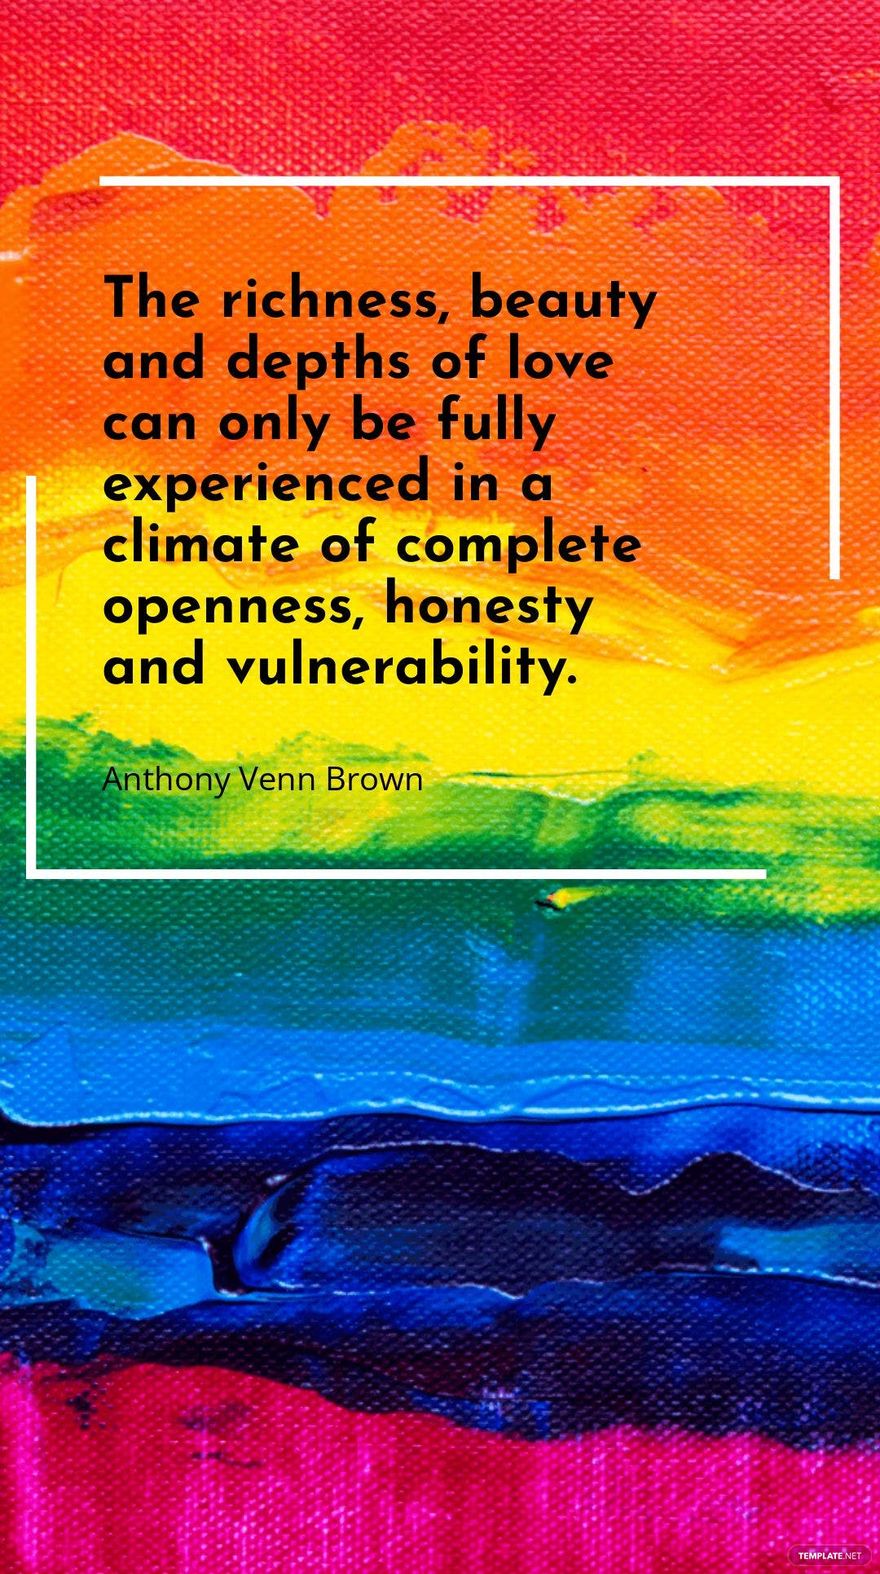 Anthony Venn Brown - The richness, beauty and depths of love can only be fully experienced in a climate of complete openness, honesty and vulnerability. in JPG